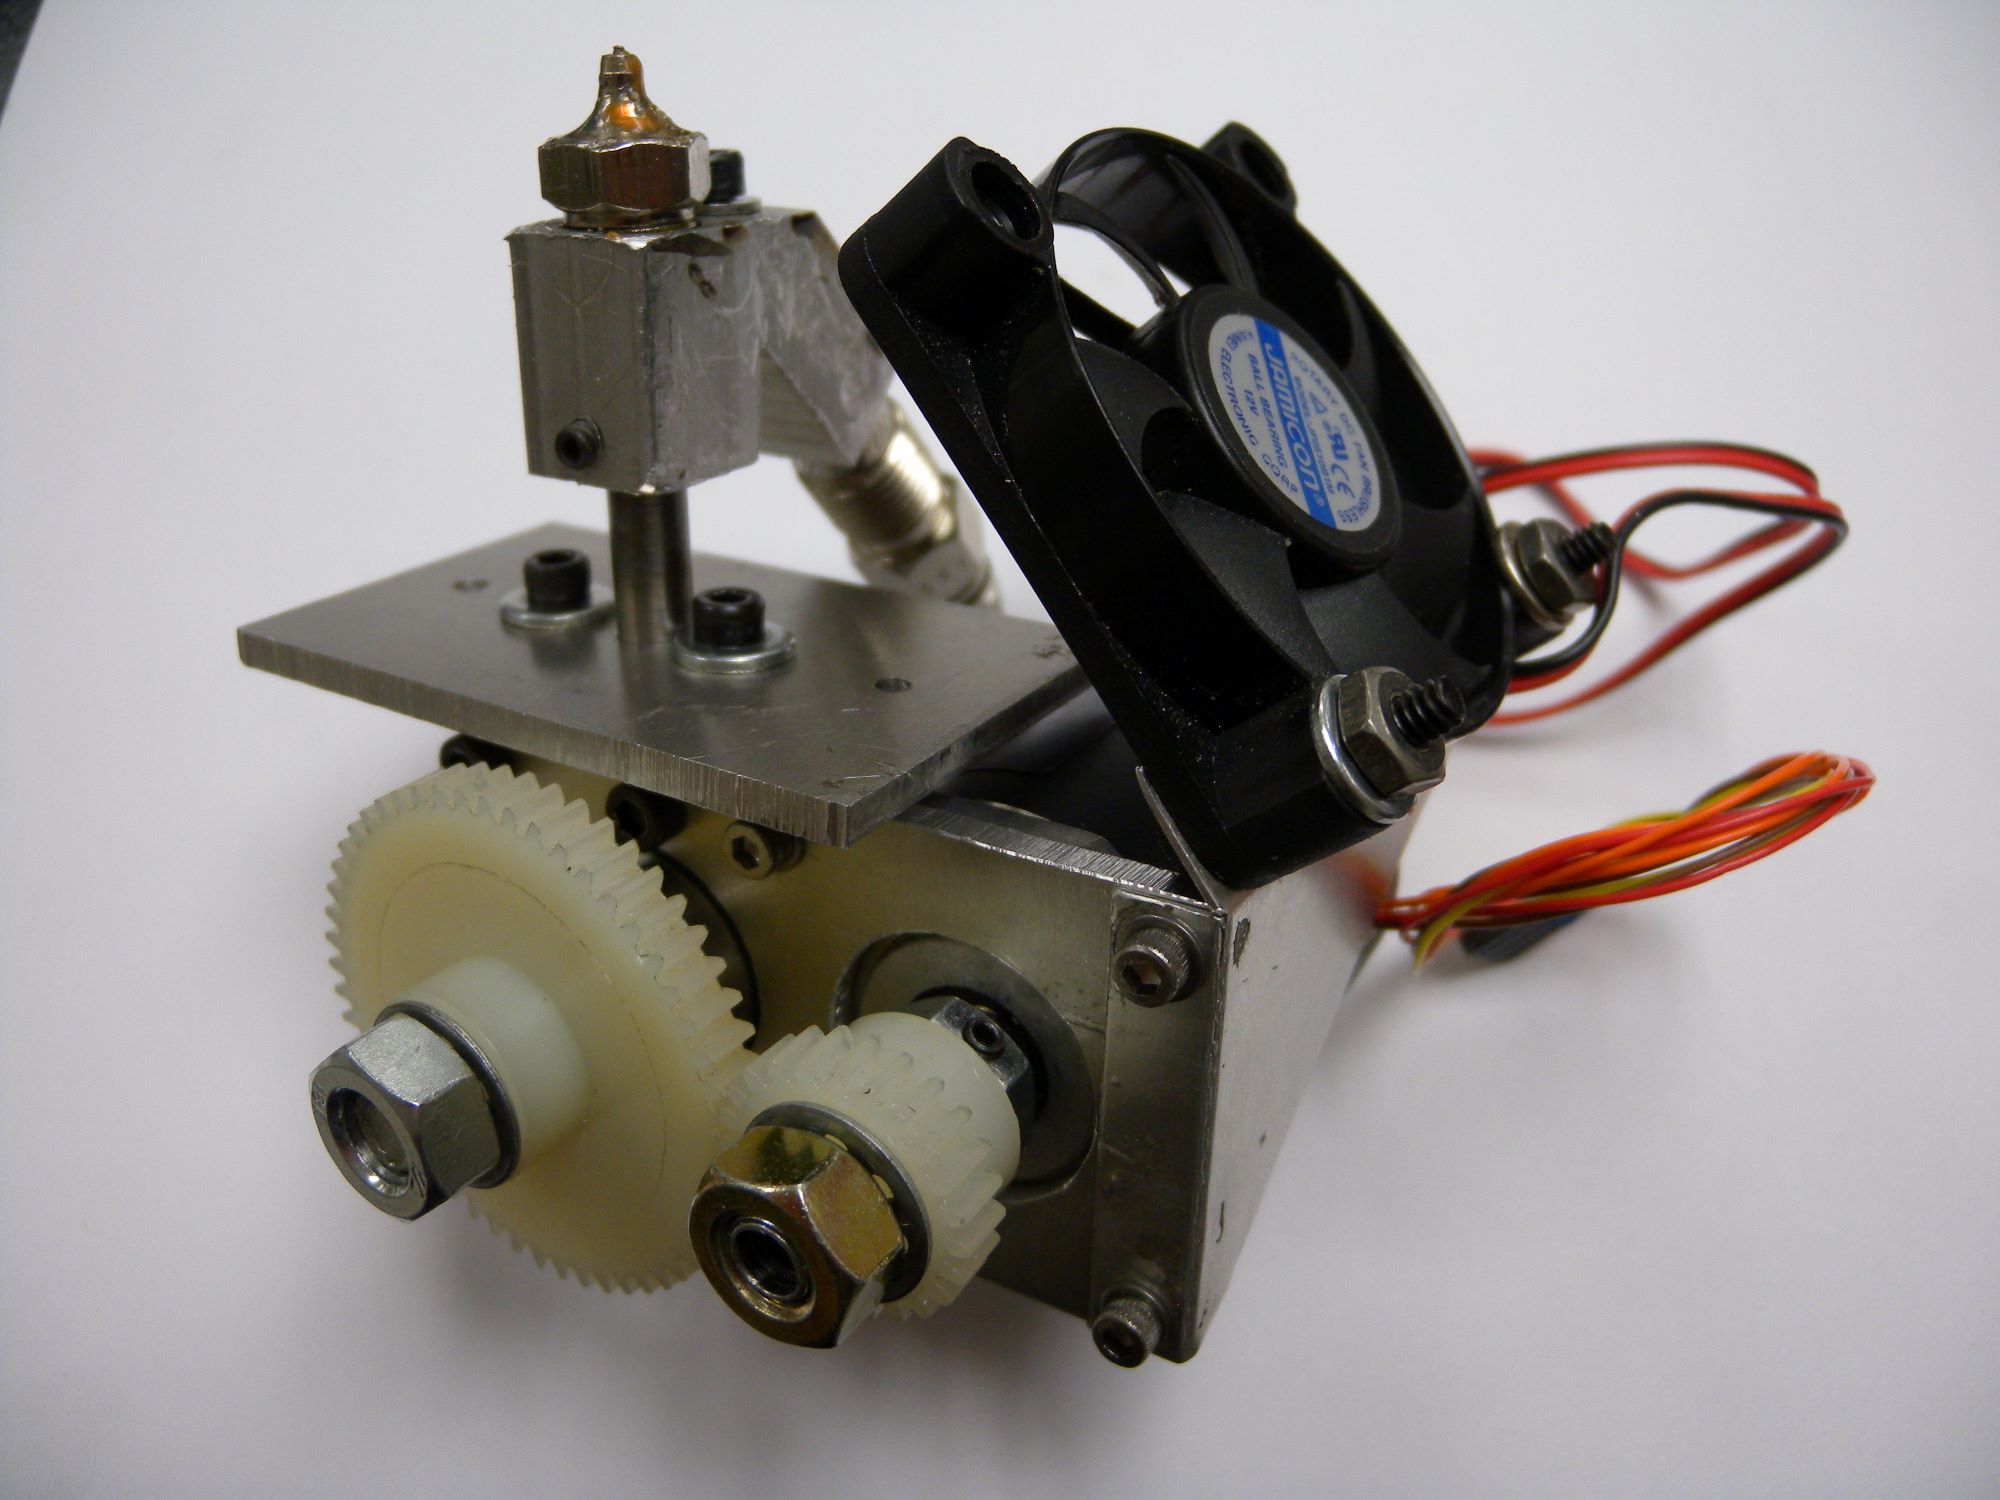 What Is An Extruder On A 3D Printer